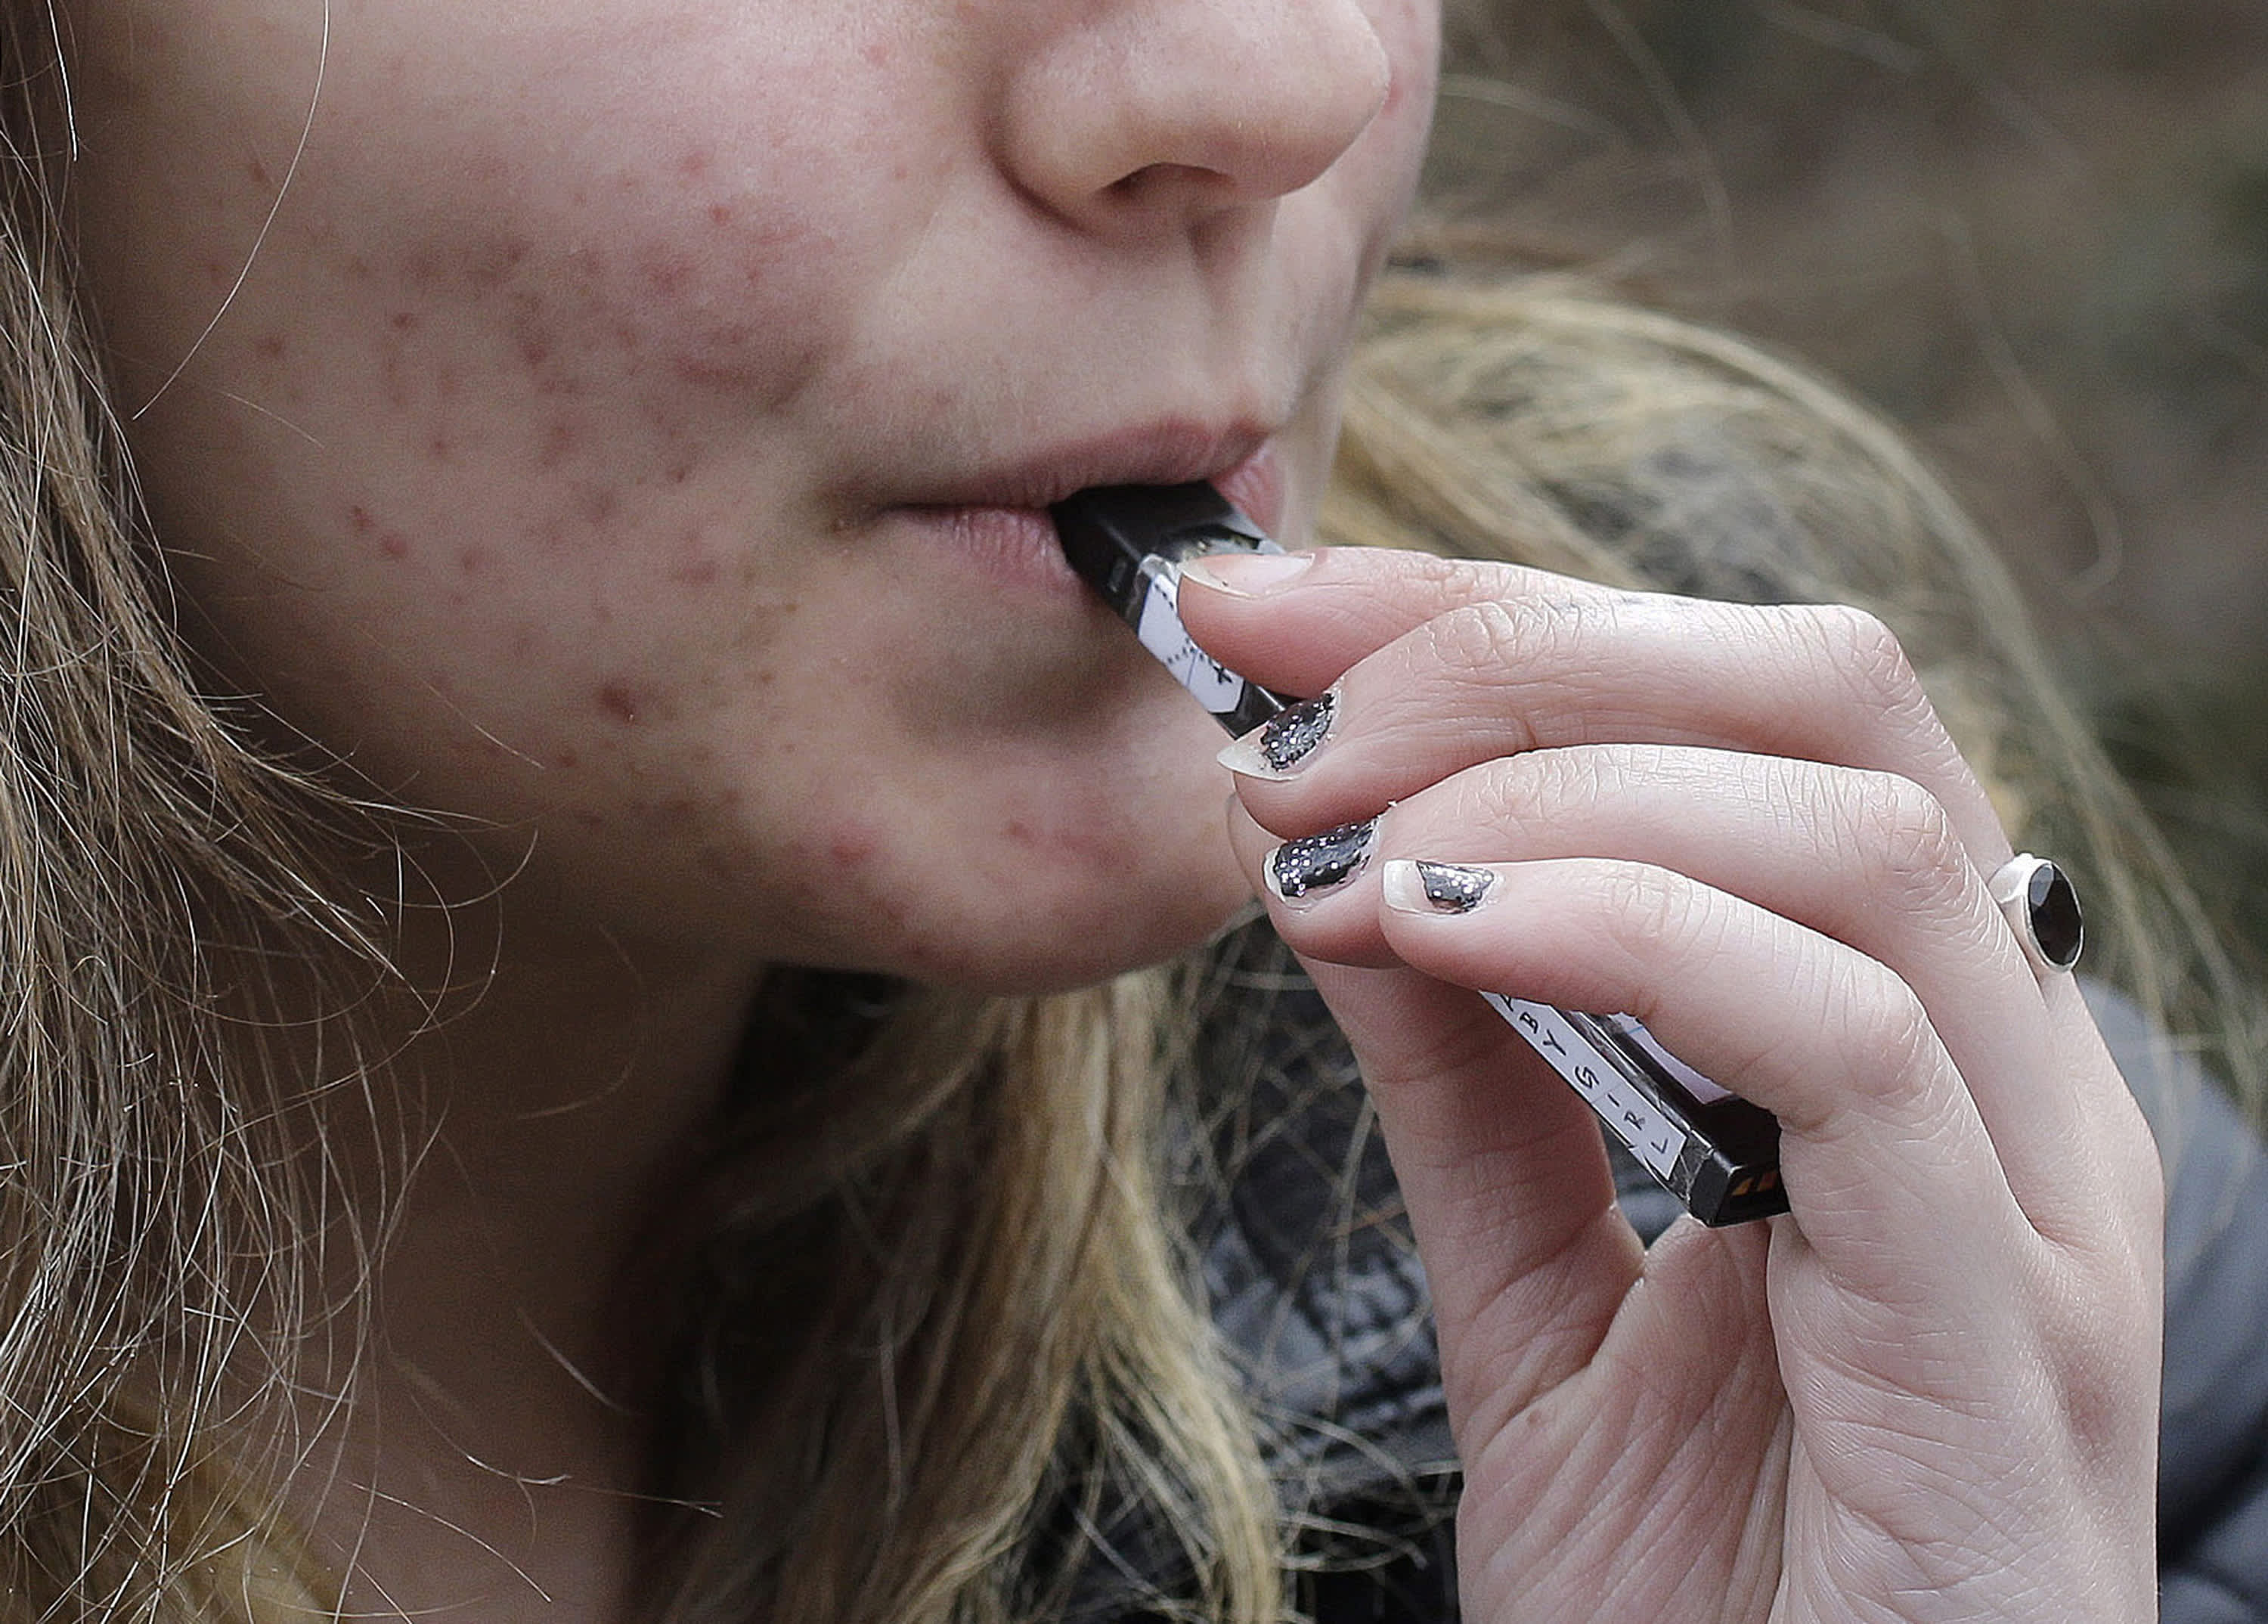 CDC says teen vaping surges to more than 1 in 4 high school students